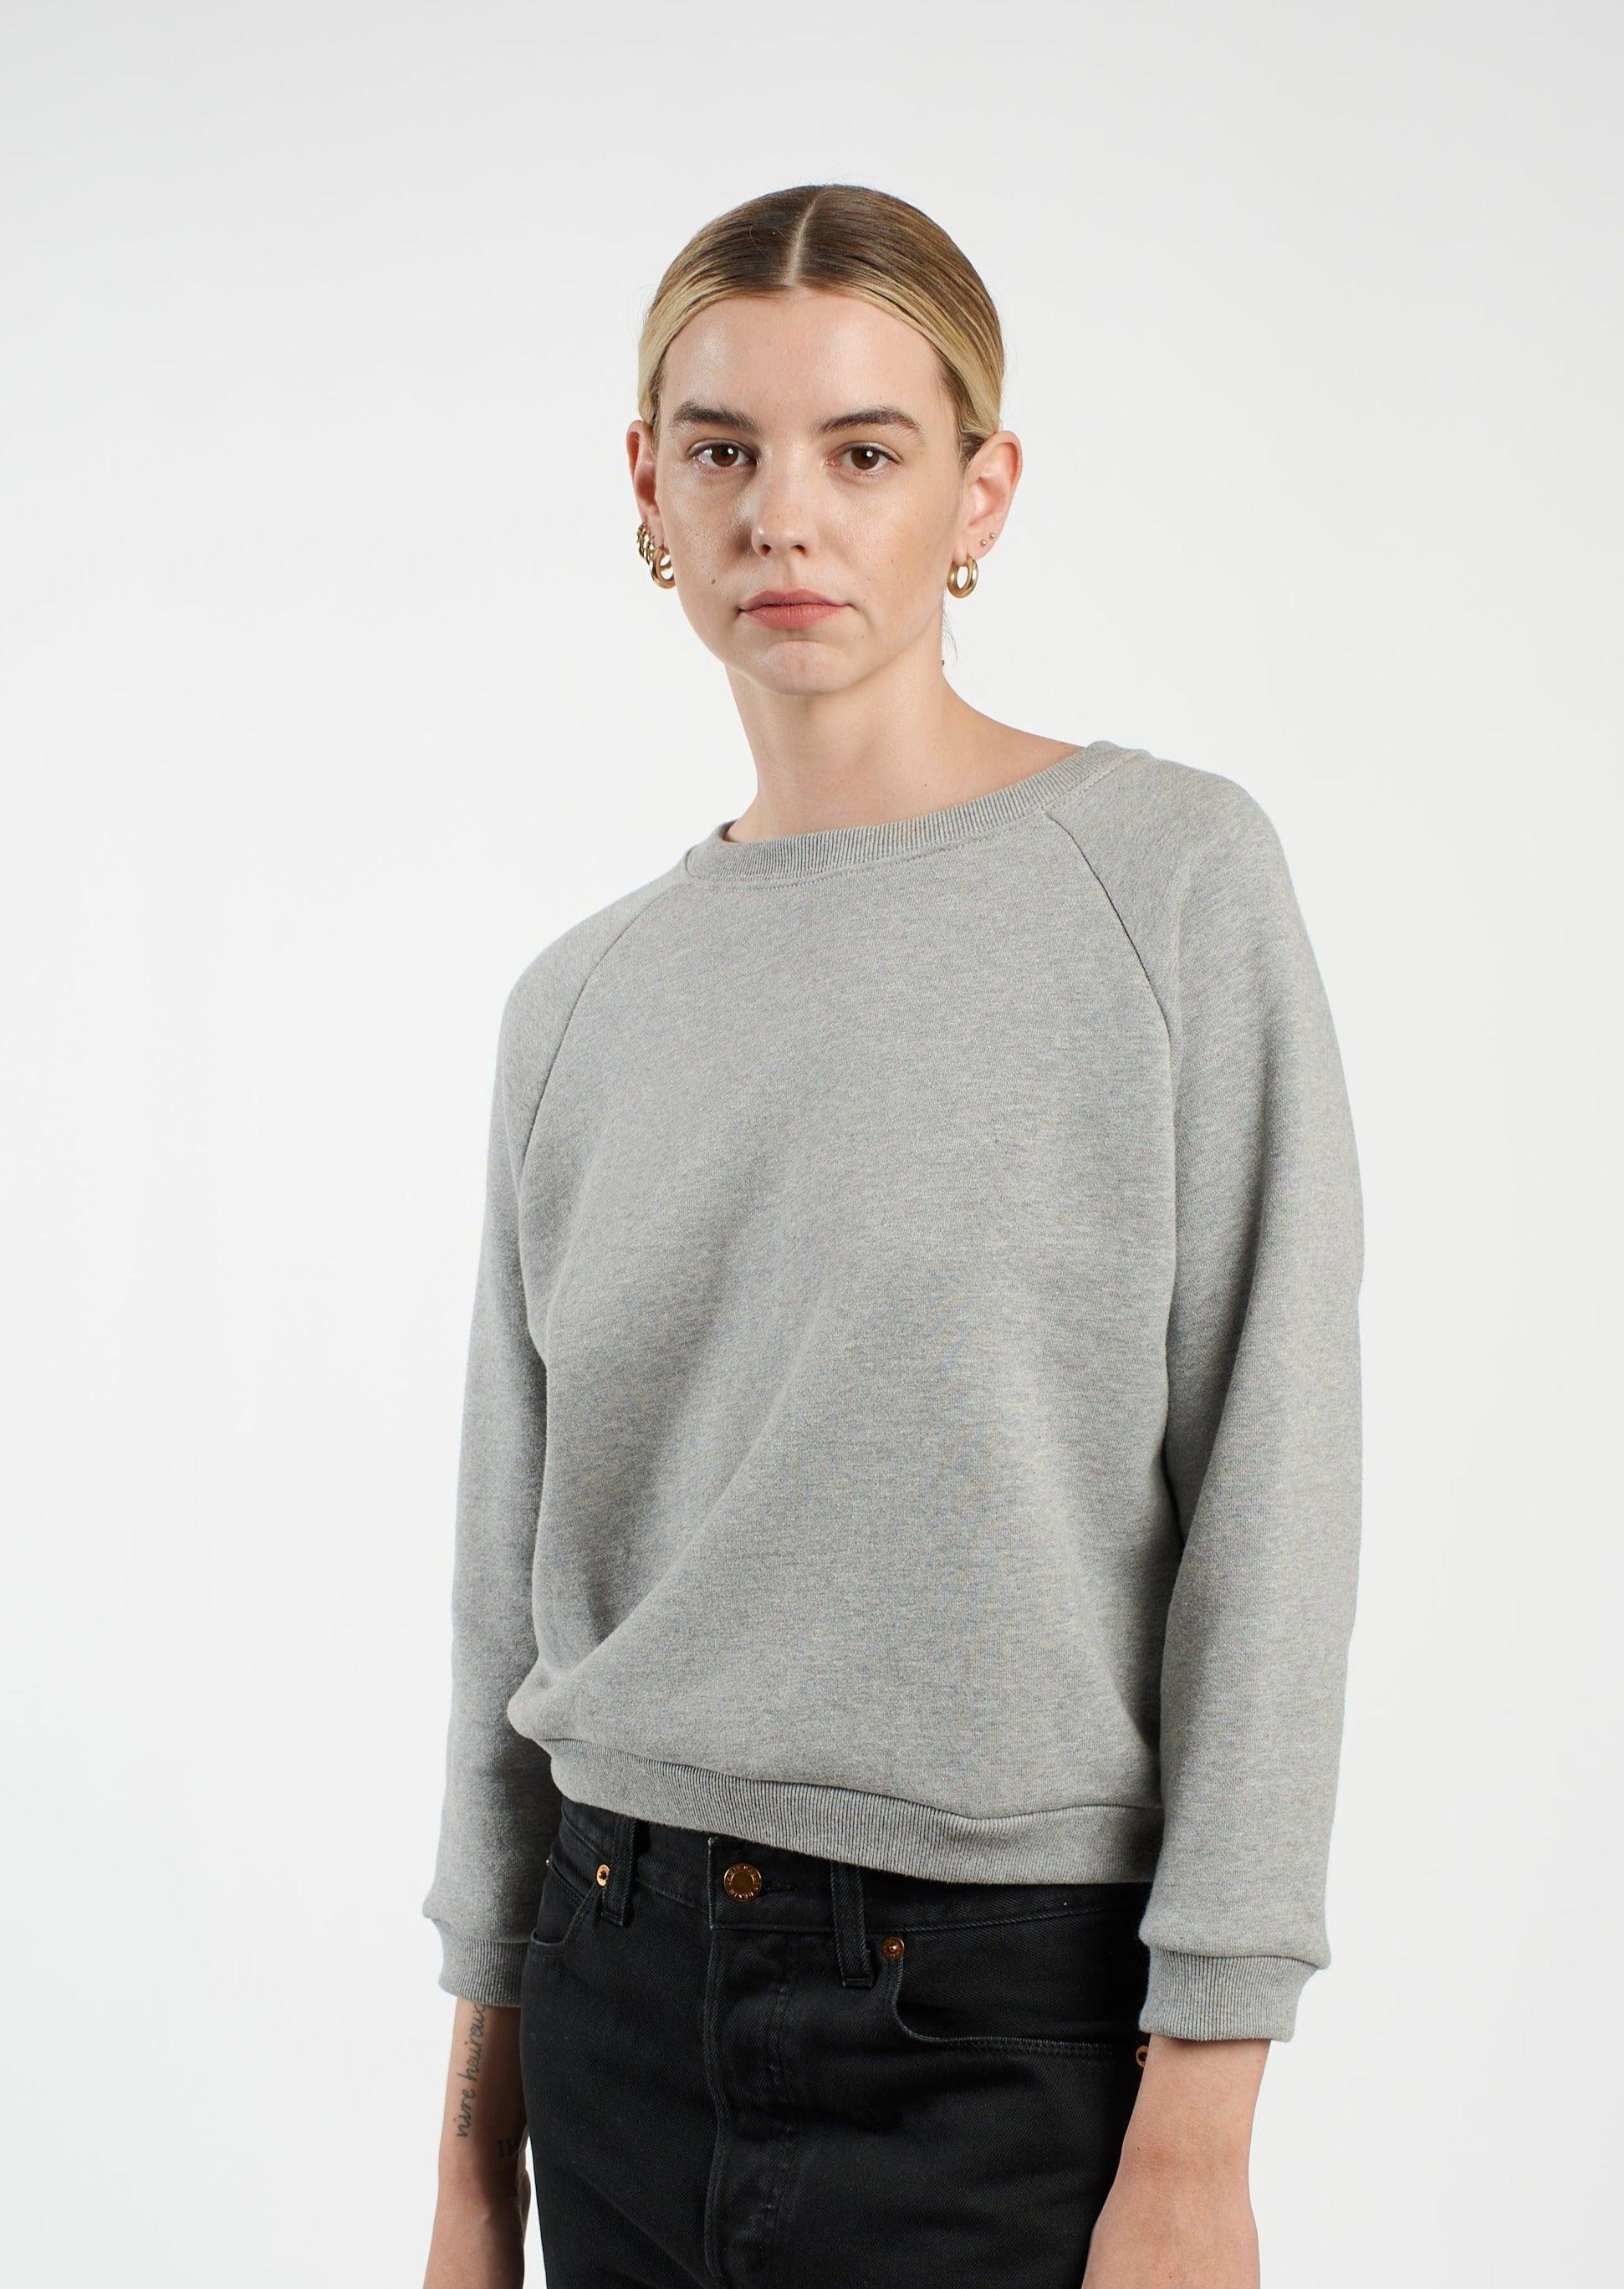 The Daily Sweatshirt in Heather Grey 3/4 Front Angle 